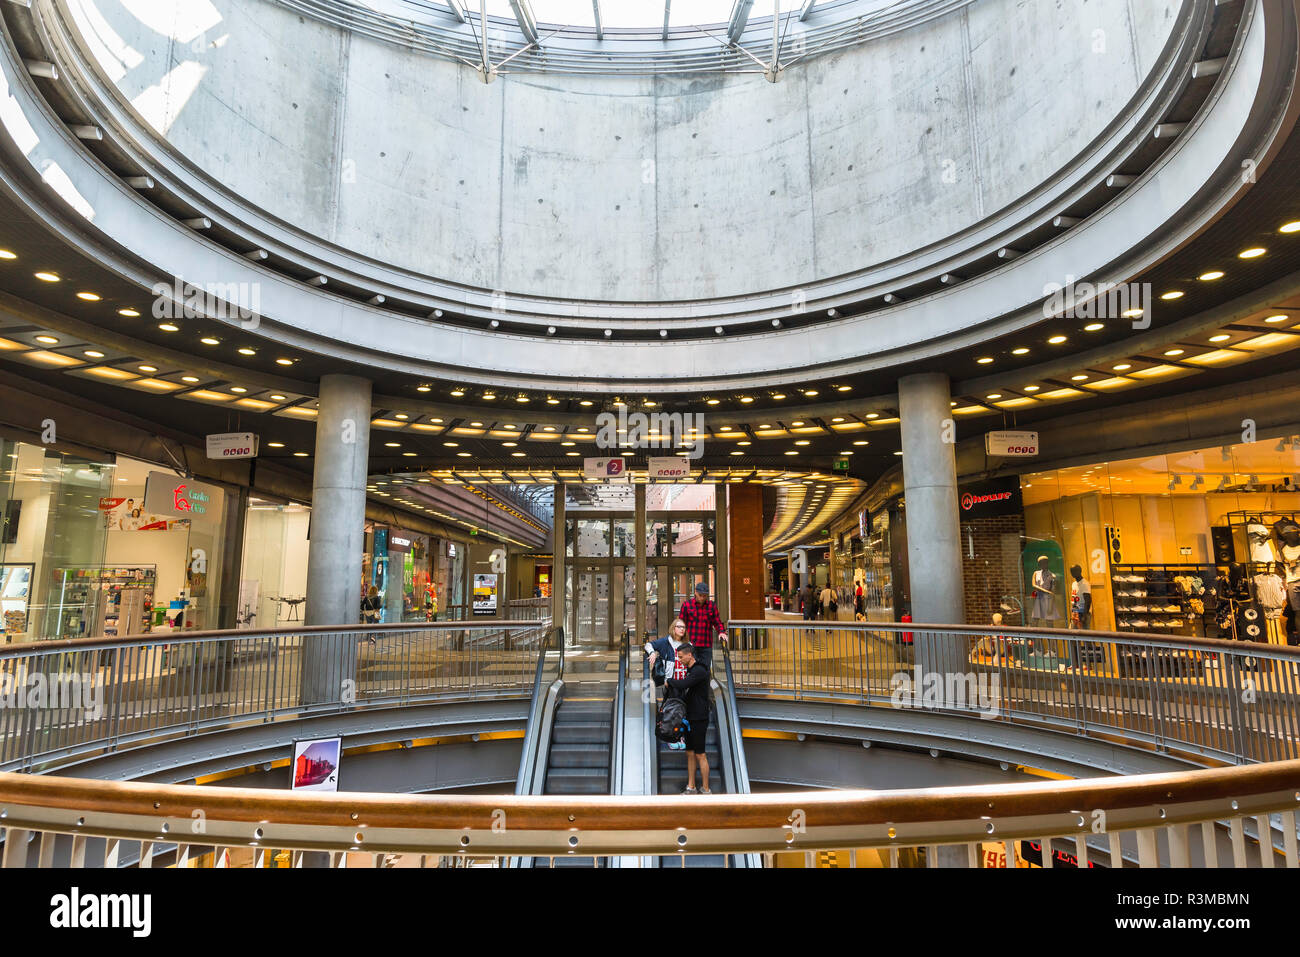 Poznan shopping centre center, view of people using the escalator underneath the grand cupola inside the Stary Browar shopping mall in Poznan, Poland. Stock Photo